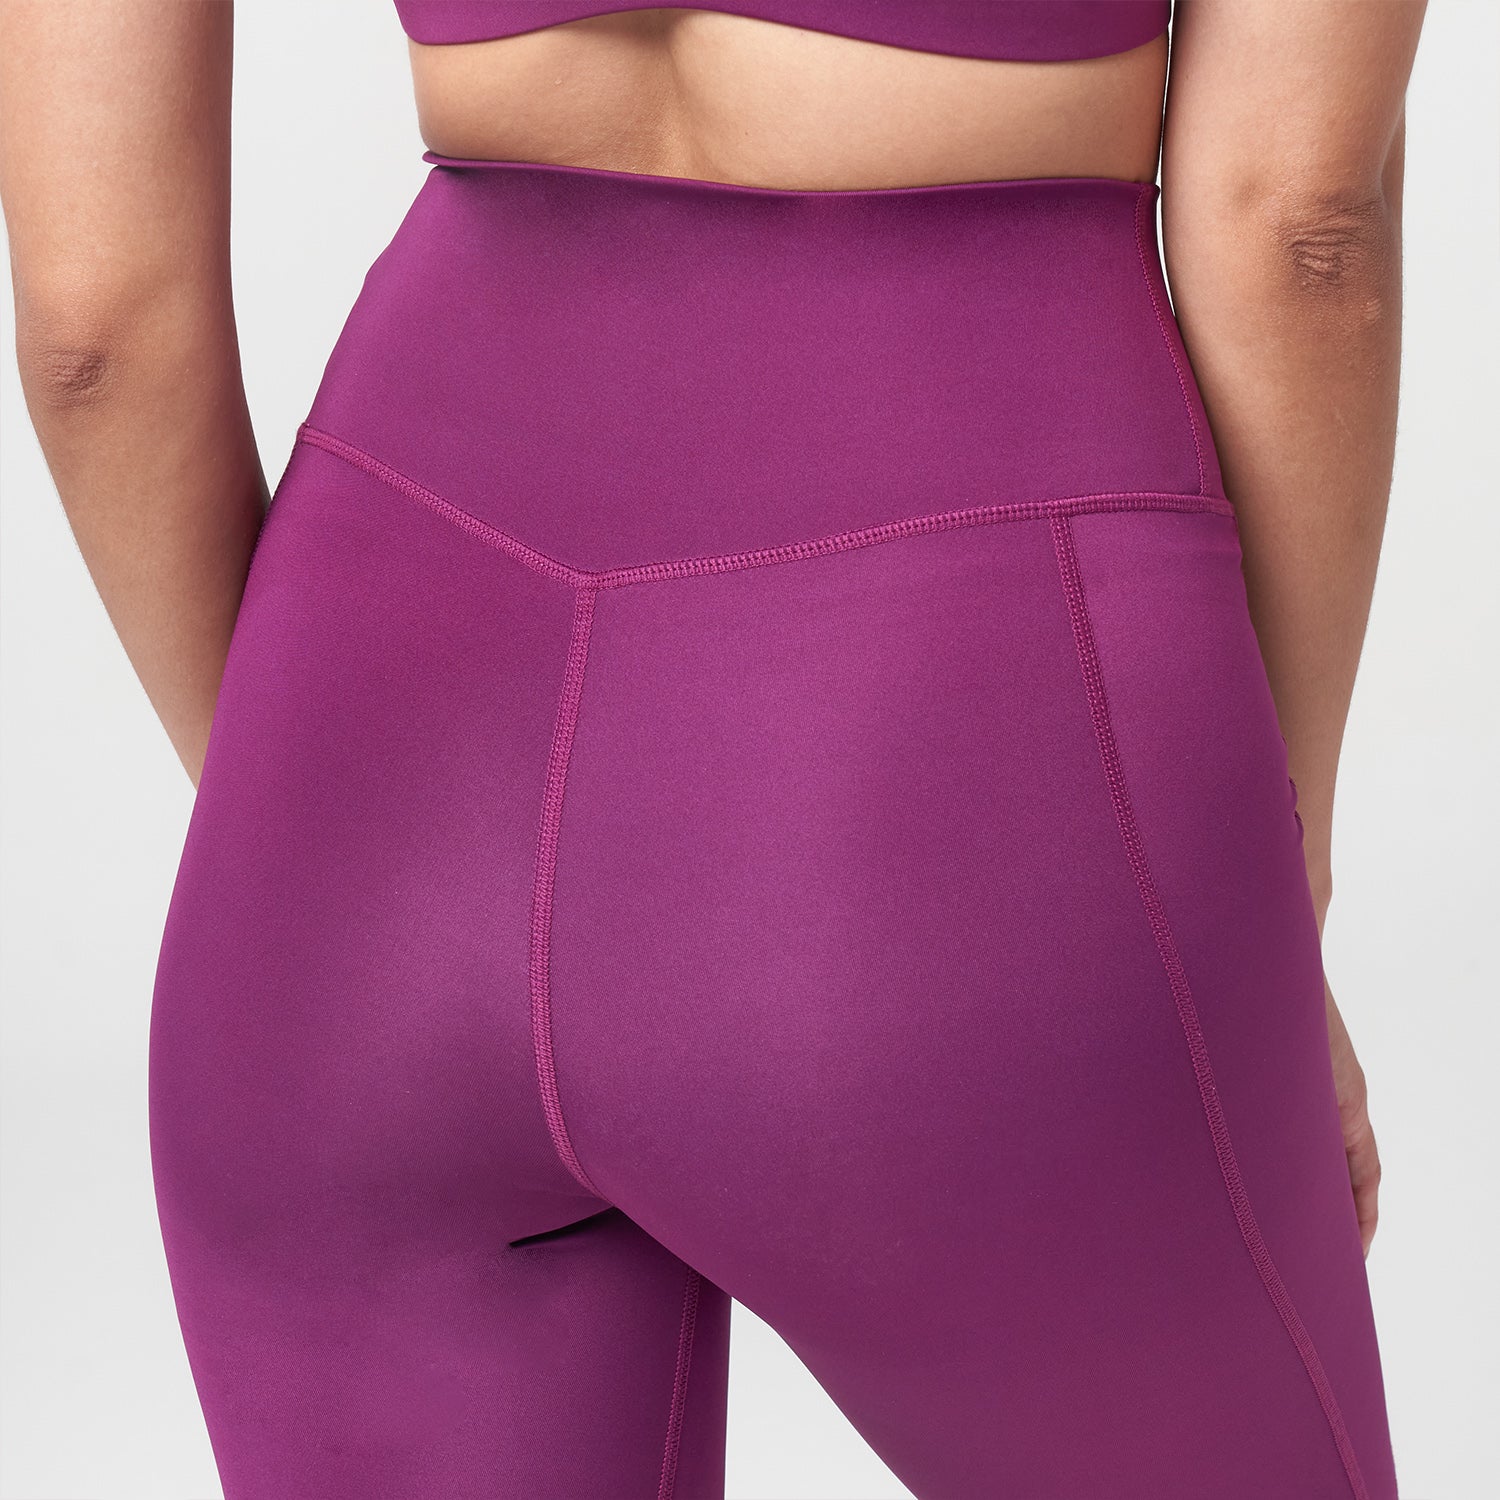 Gymshark Set Flex Leggings And Crop Top Purple - $60 (11% Off Retail) New  With Tags - From Kensey